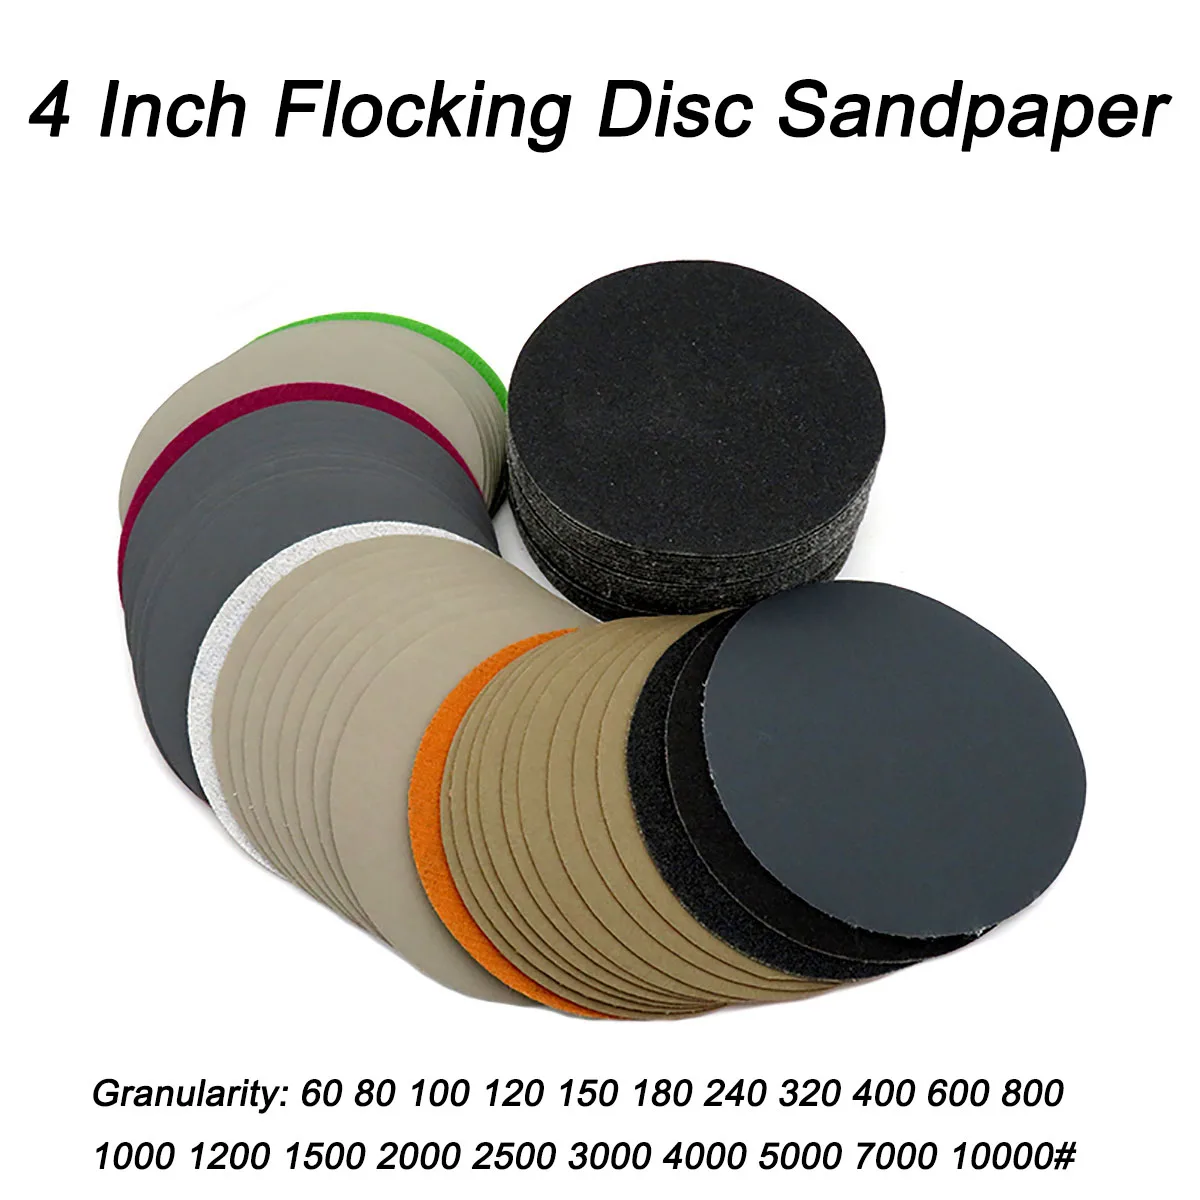 

5Pcs Size 6 Inch, Diameter 150mm Wet and Dry Flocking Disc Sandpapers Granularity 60 - 10000# for Jade Grinding and Polishing